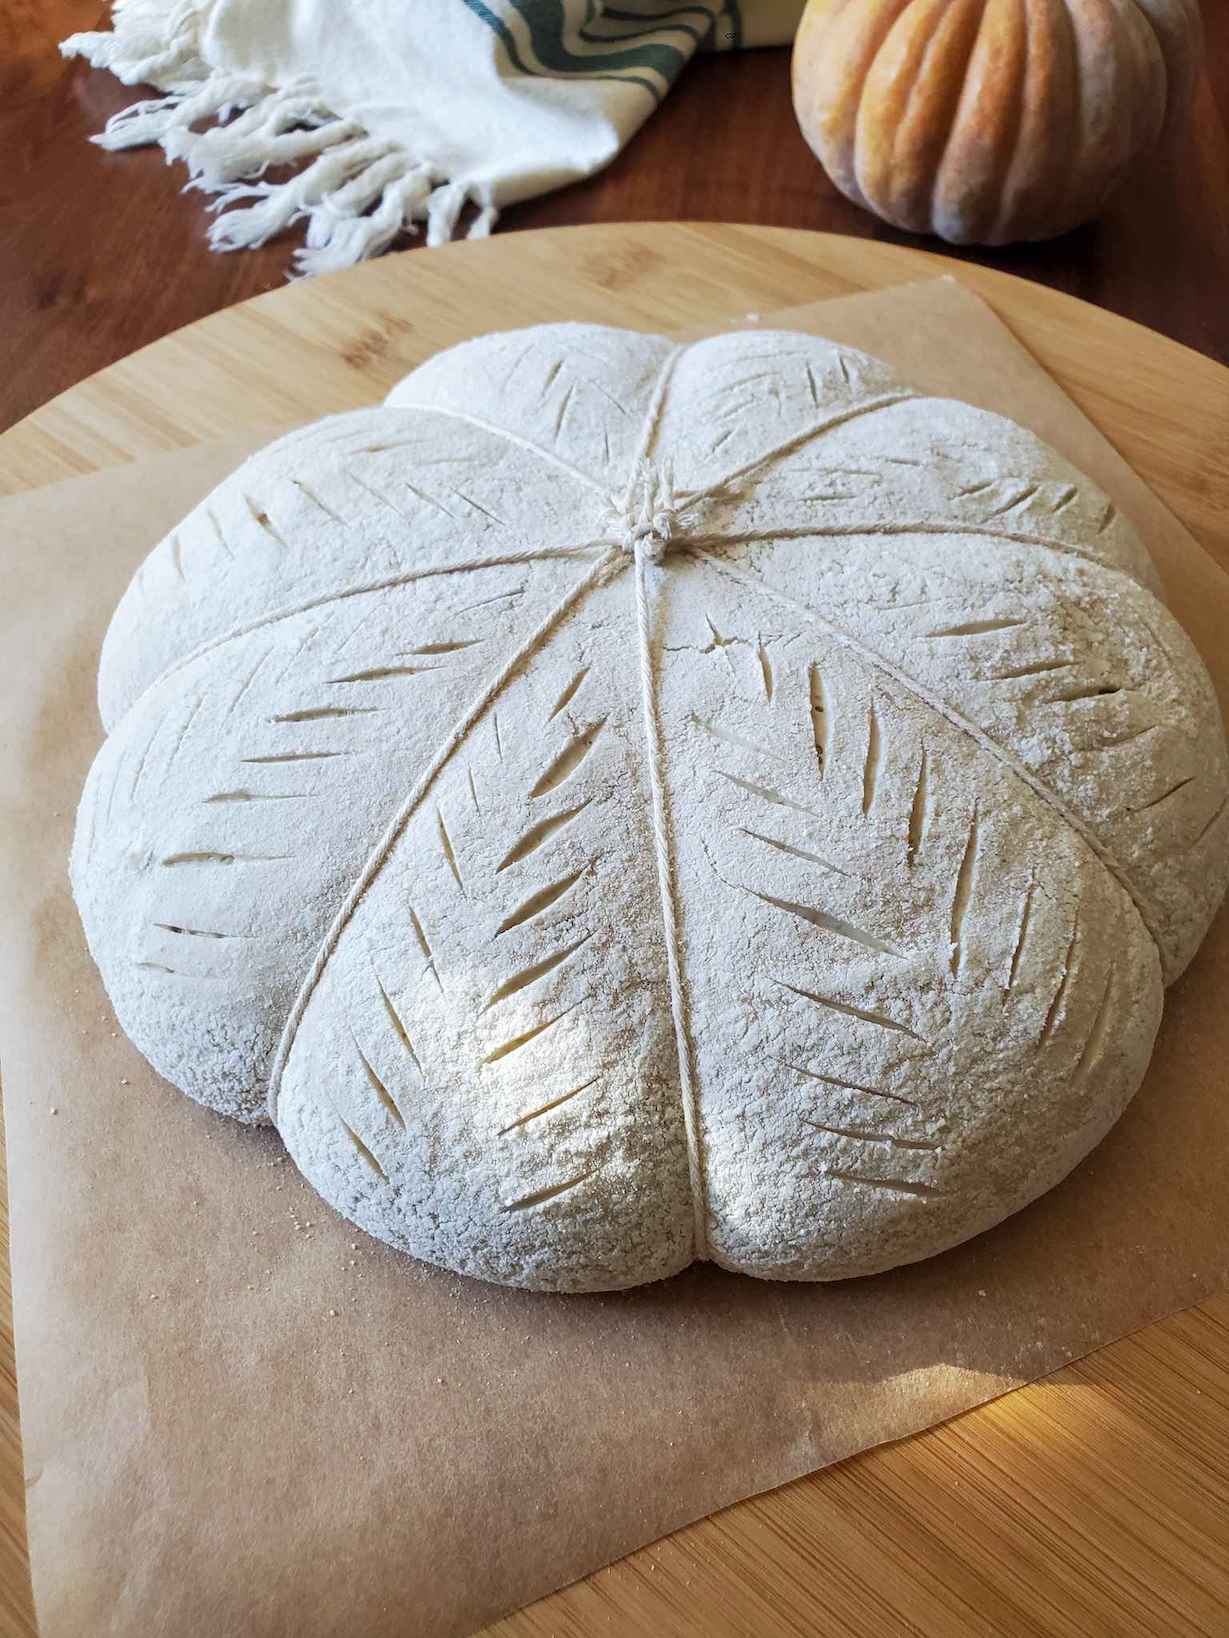 An unbaked pumpkin shaped sourdough is sitting on parchment paper atop a circular wooden board. It has been scored with many slits on each of its lobes and is ready to be baked in the oven. 